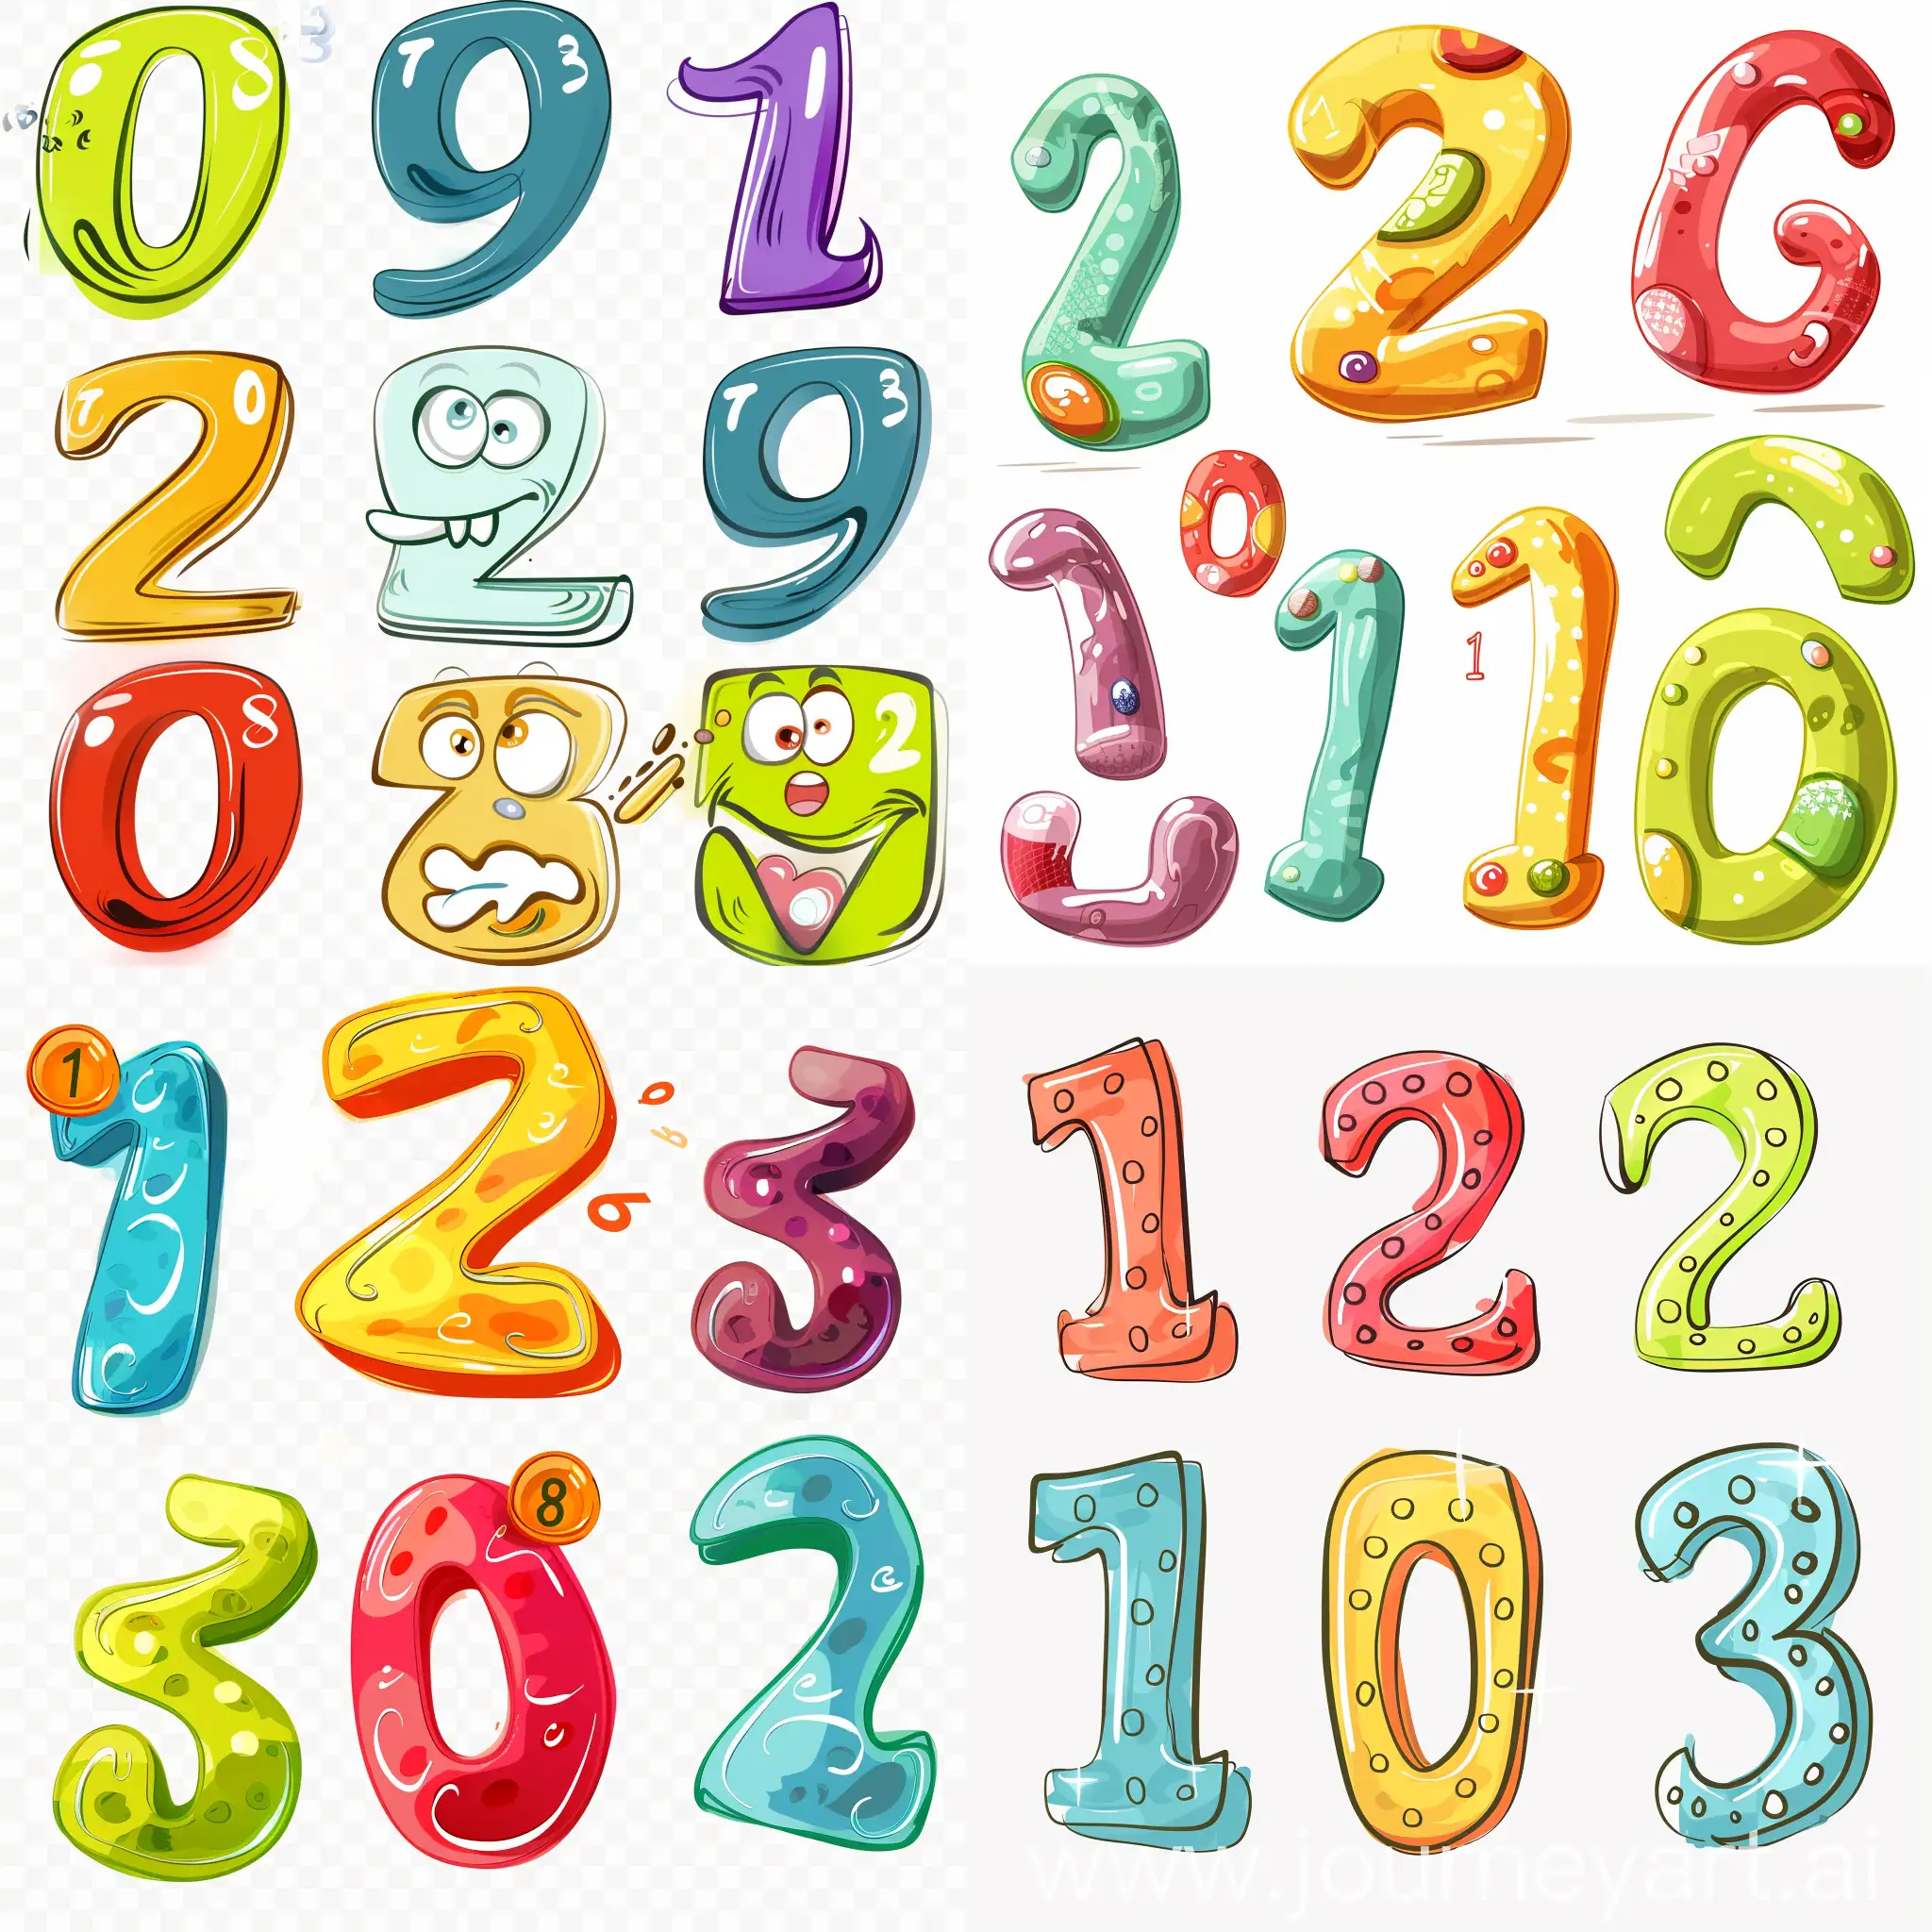 Cartoon, humorous style. Transparent Background. Funny numbers from 1 to 10.